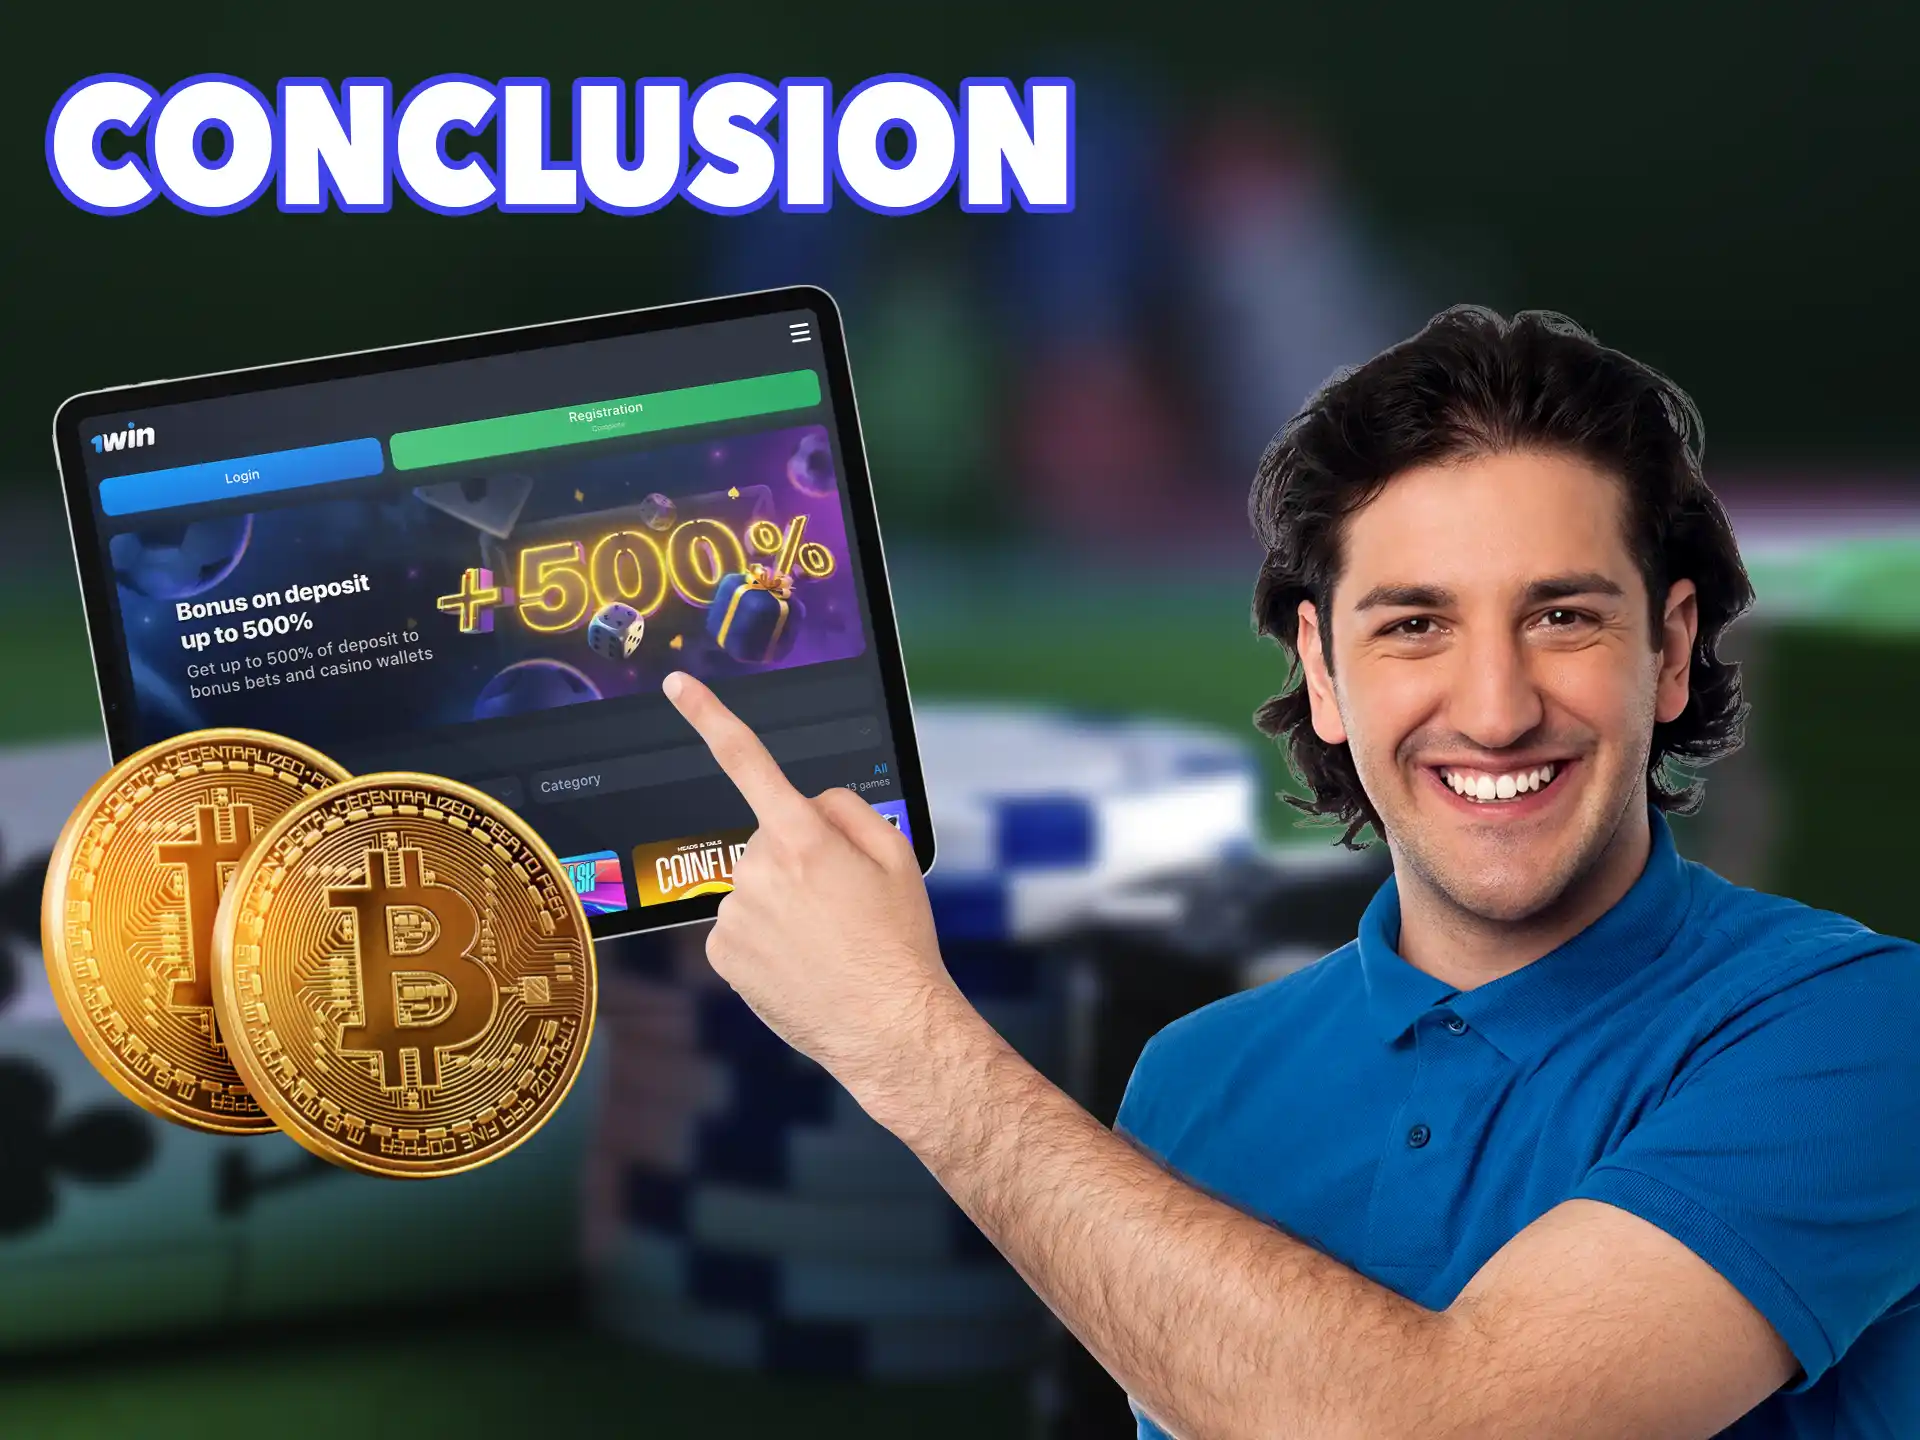 In this review you got acquainted with the most trusted crypto casinos and now you know who to prefer in gambling.